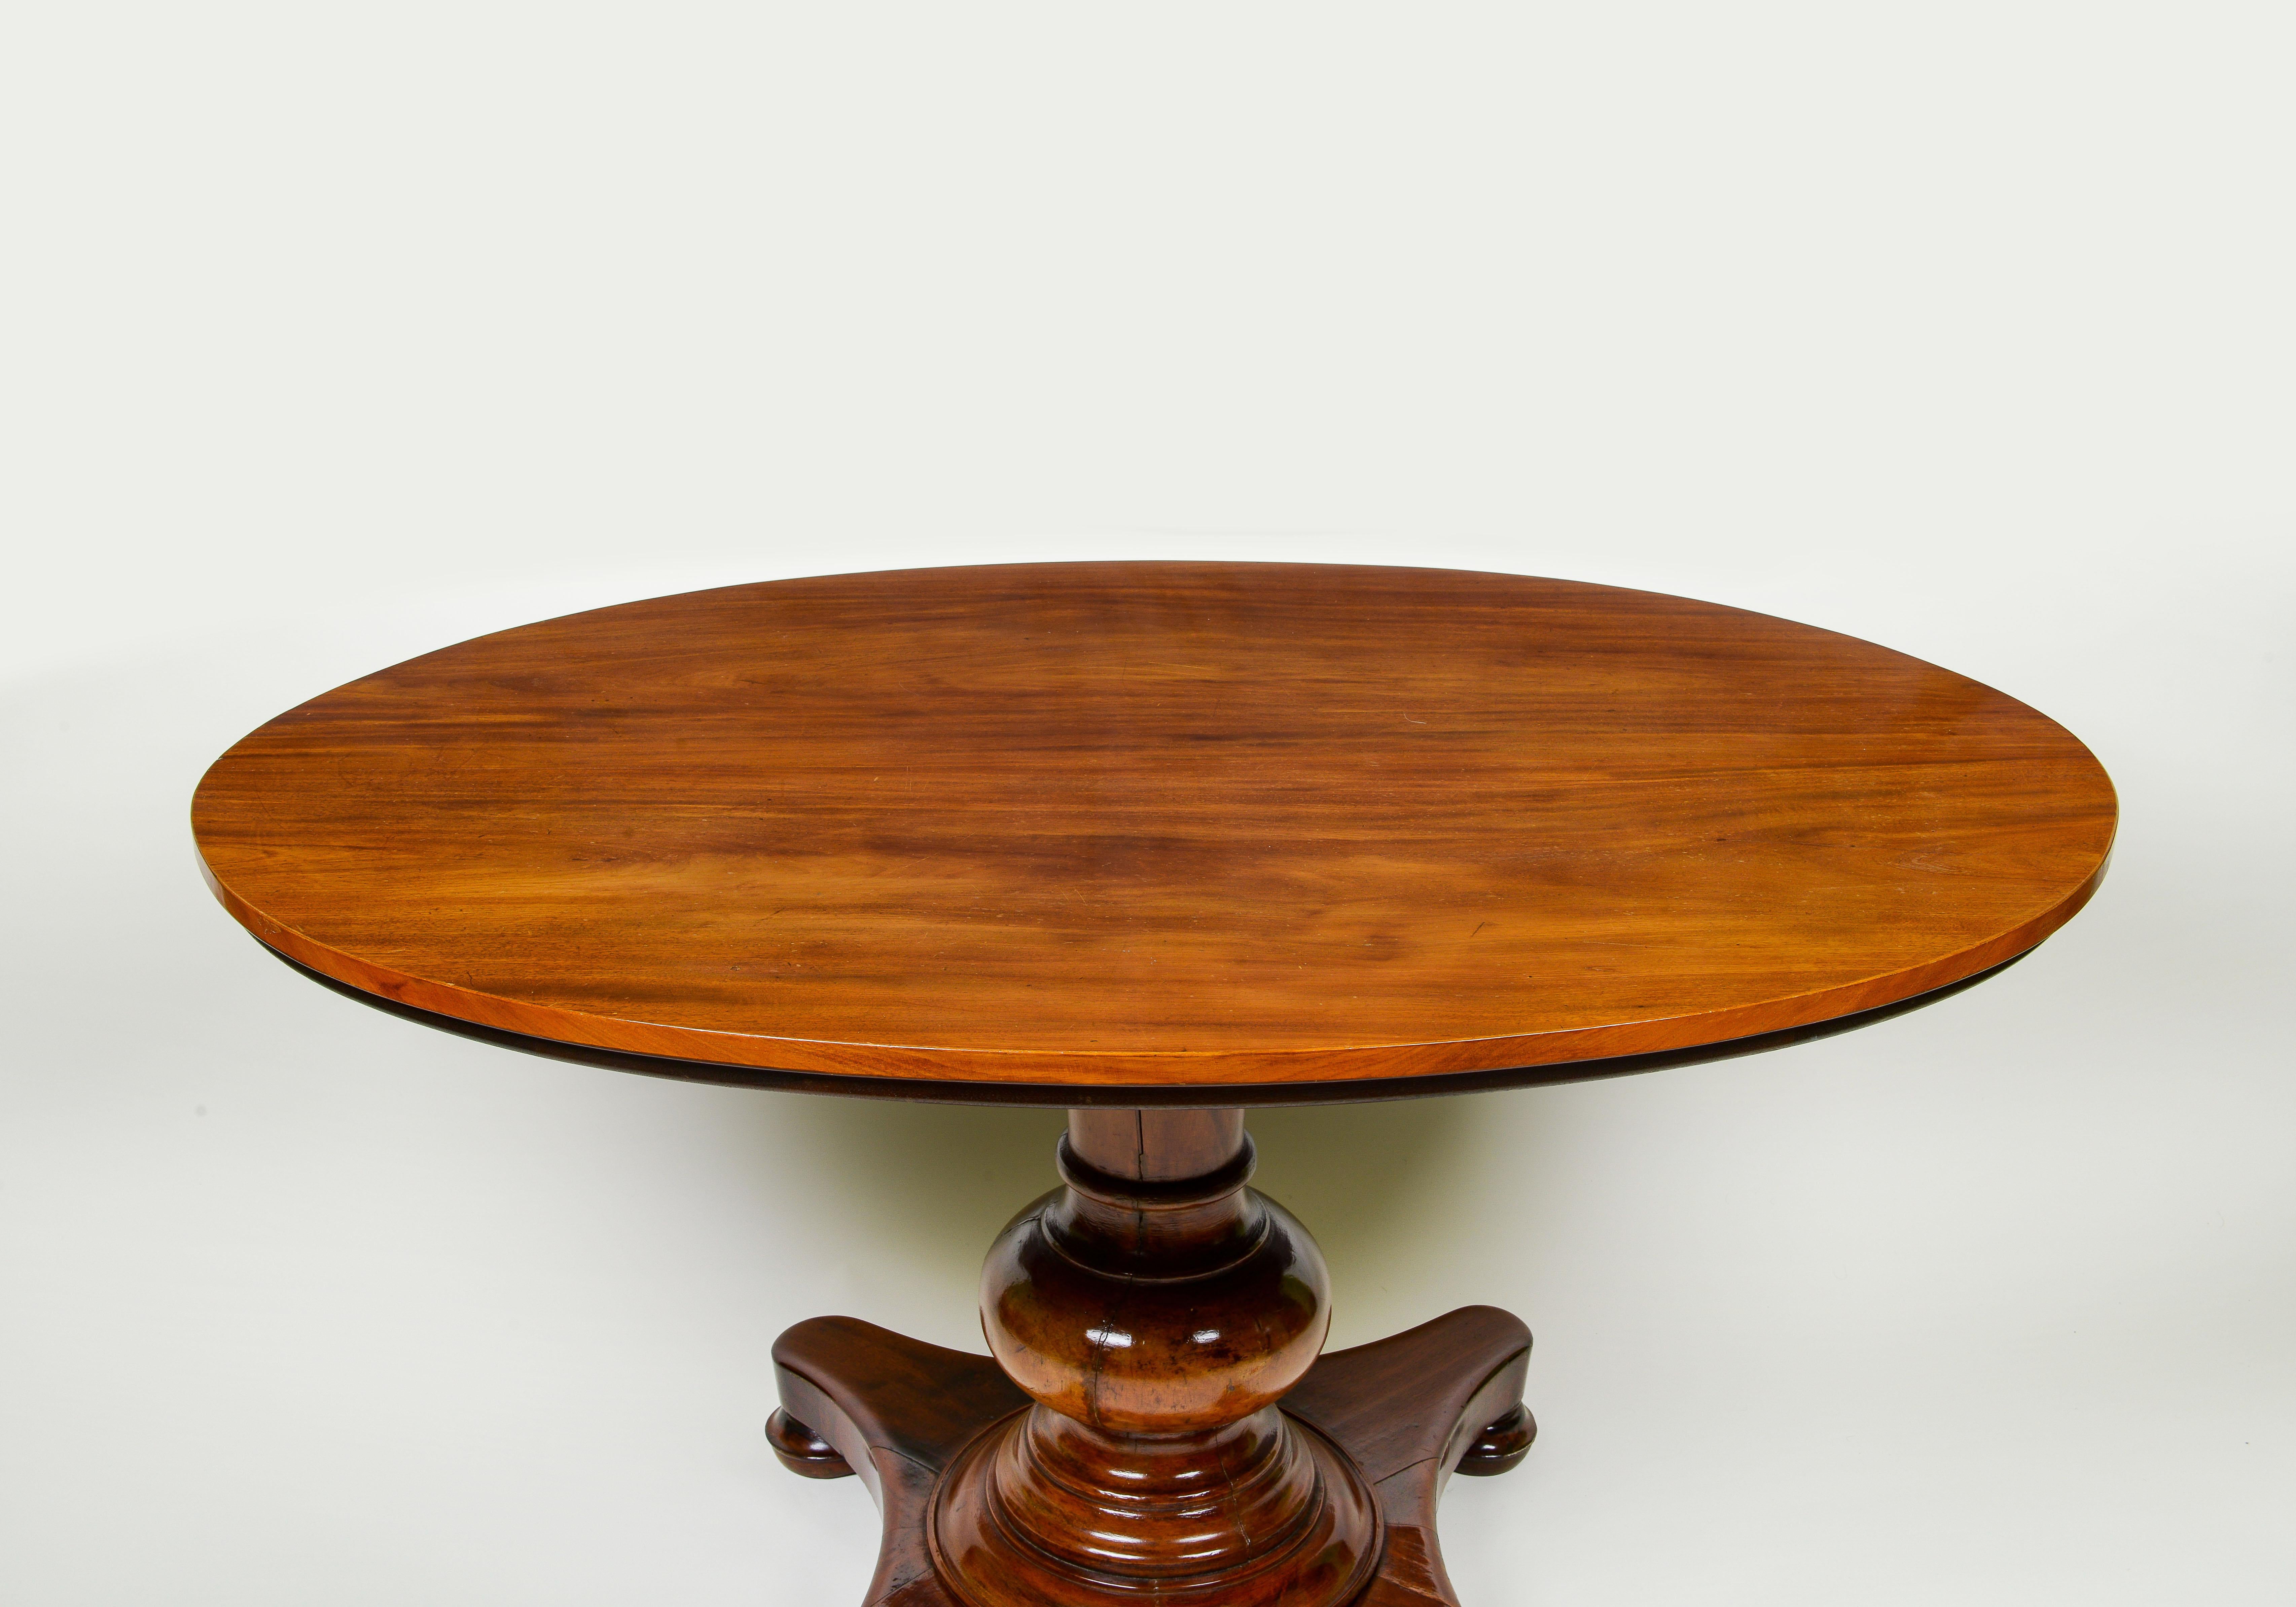 Turned A Continental Mahogany Oval Center Table For Sale